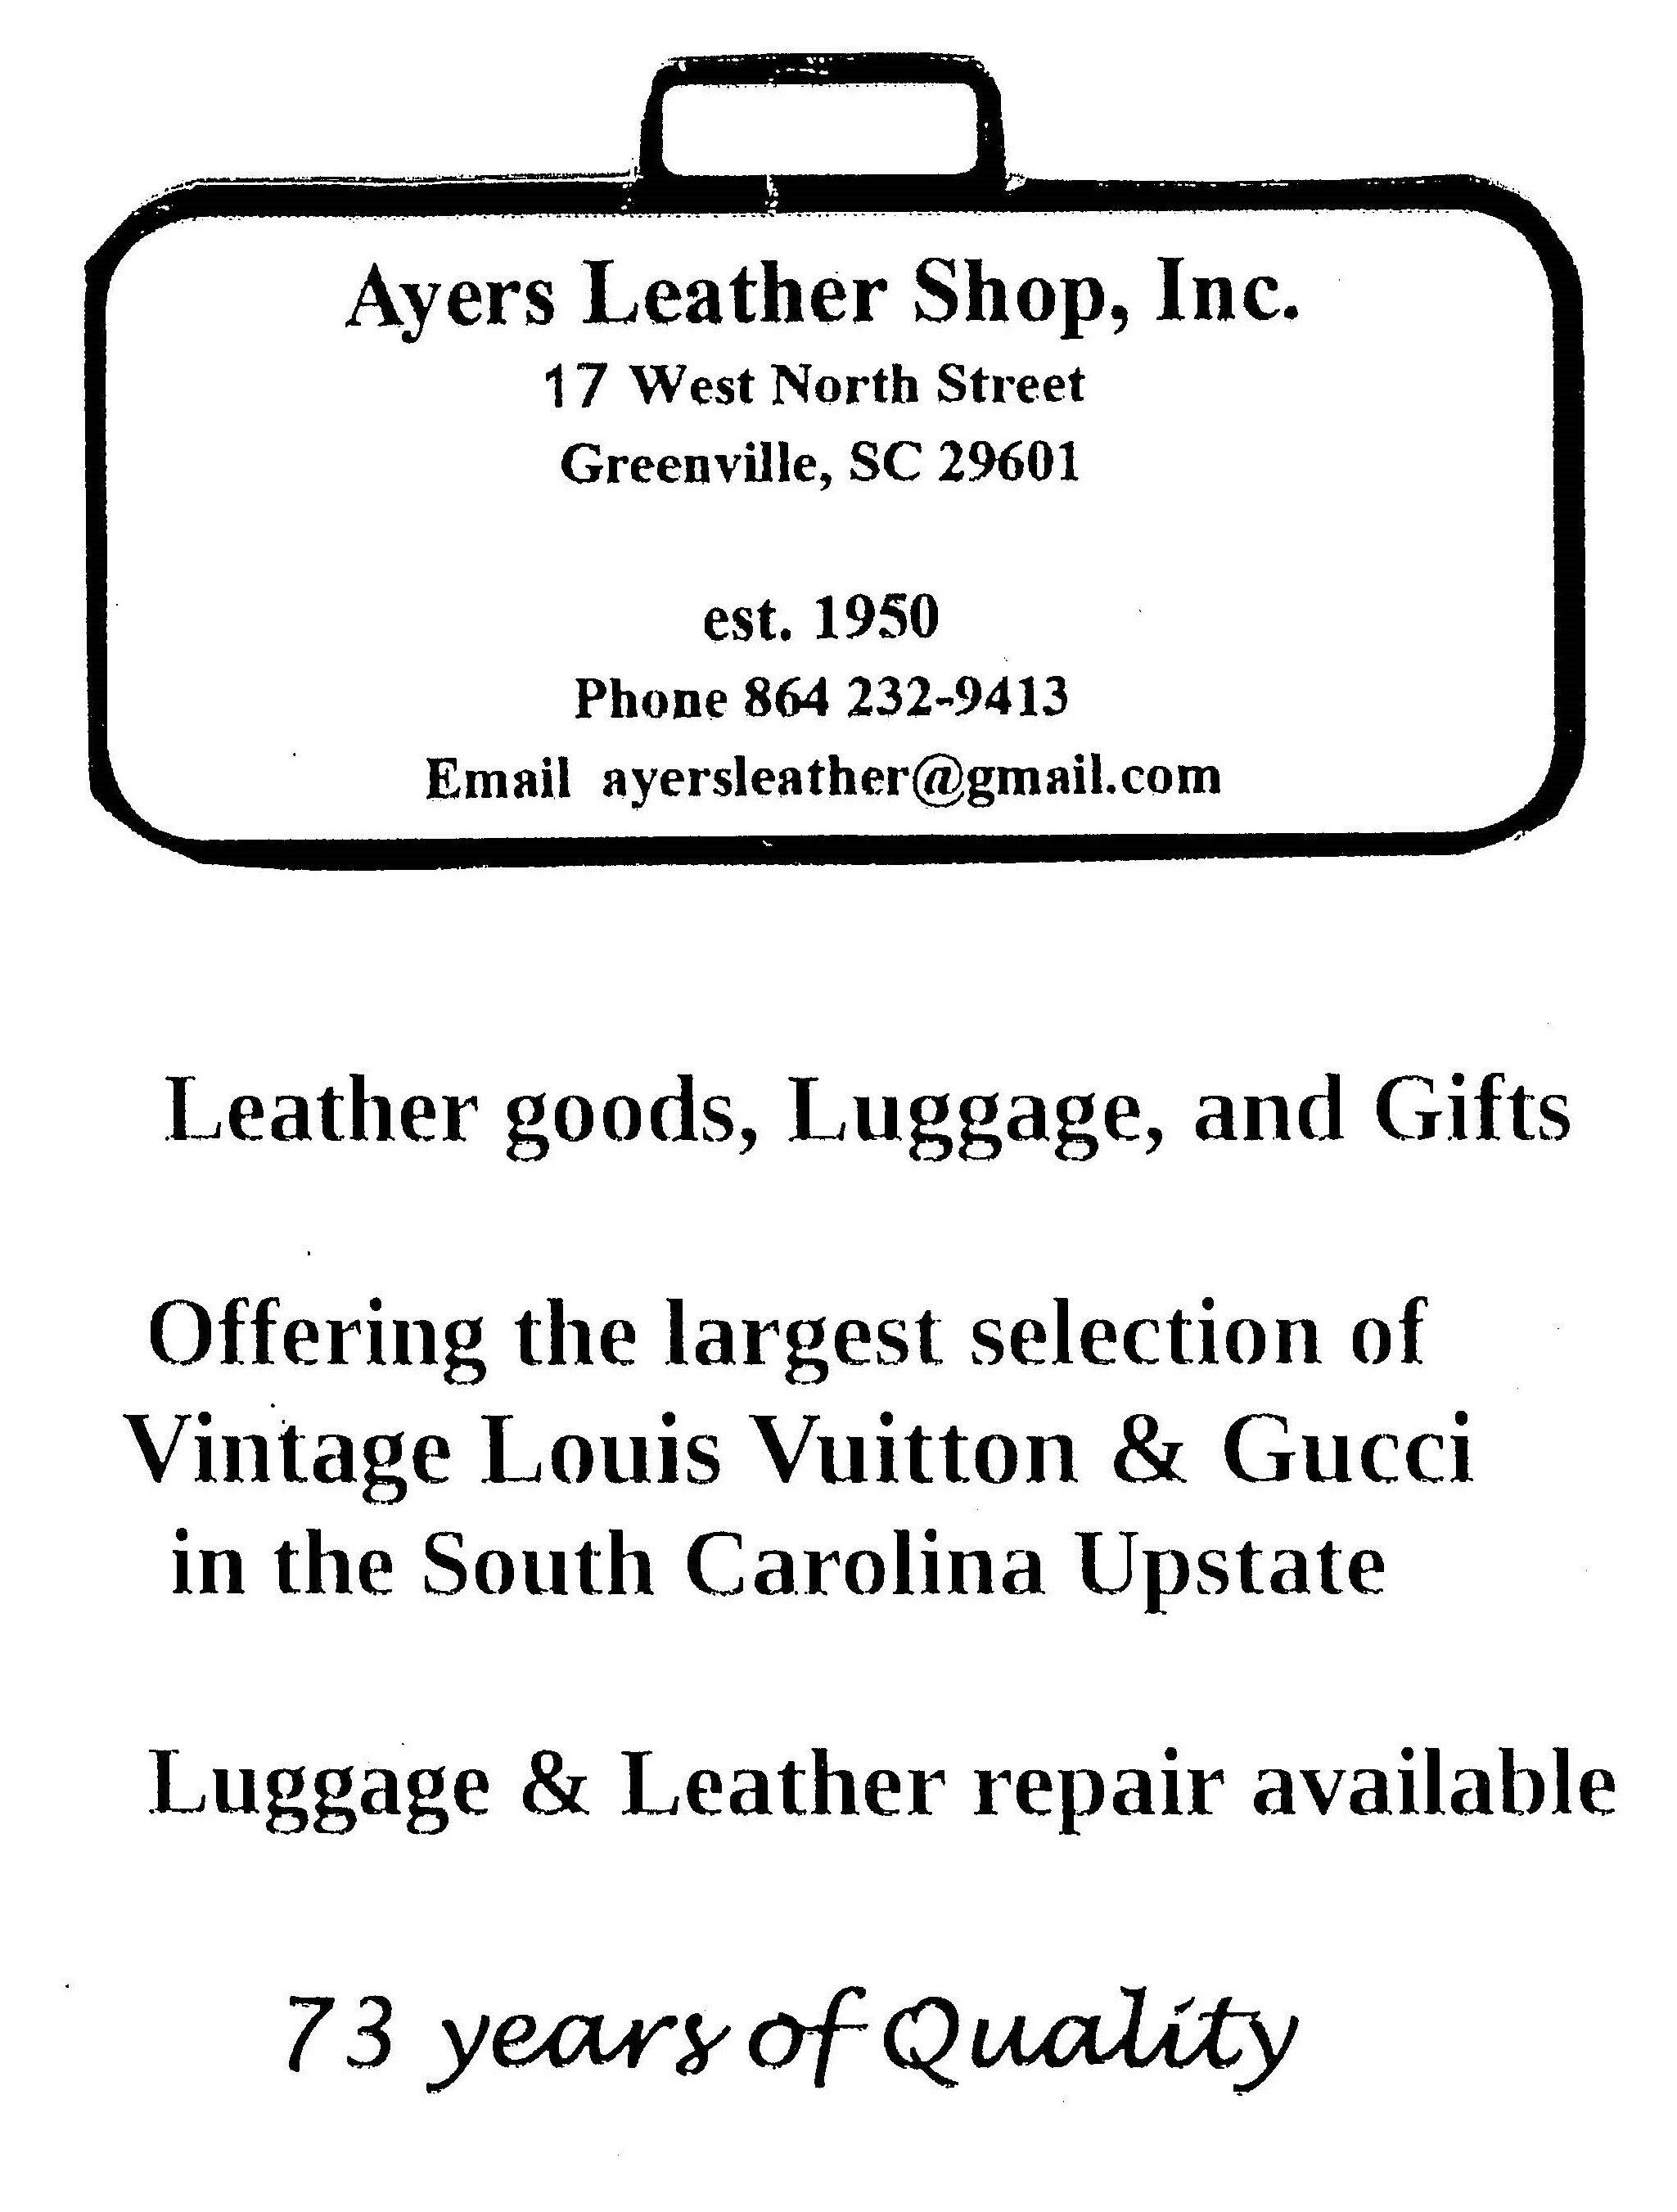 Ayers Leather Shop - quarter page.jpg